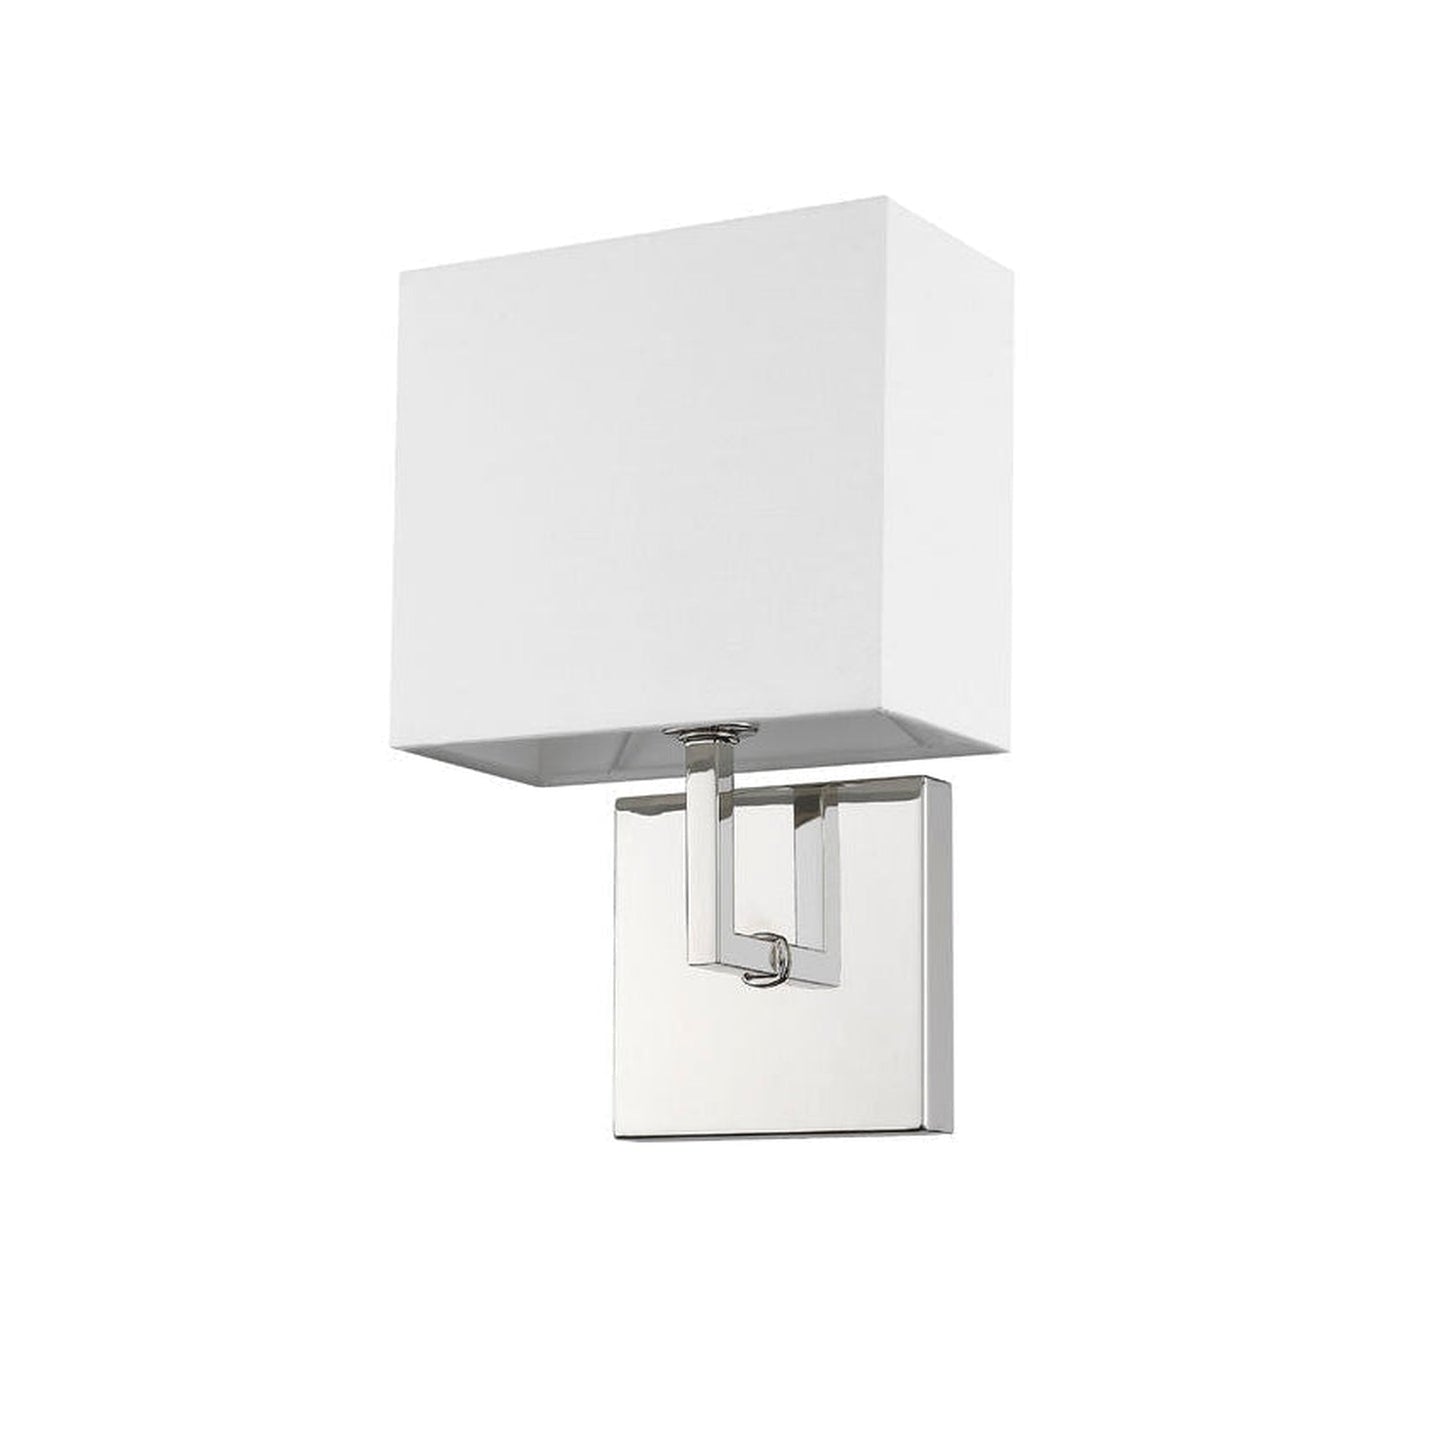 Z-Lite Saxon 7" 1-Light Polished Nickel Wall Sconce With White Fabric Shade